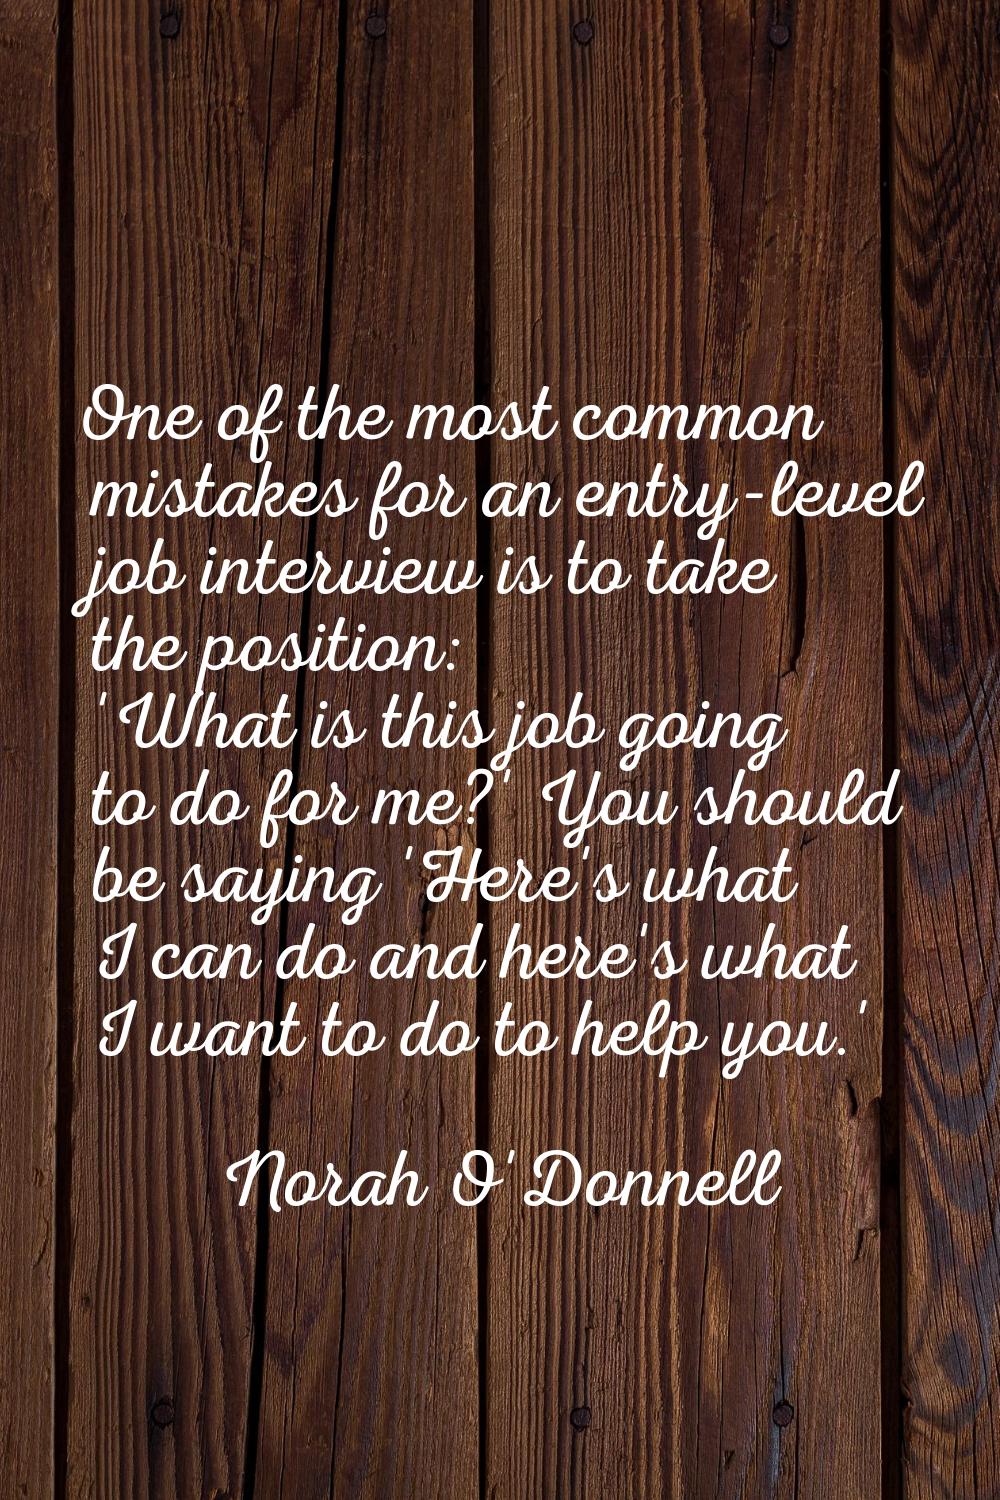 One of the most common mistakes for an entry-level job interview is to take the position: 'What is 